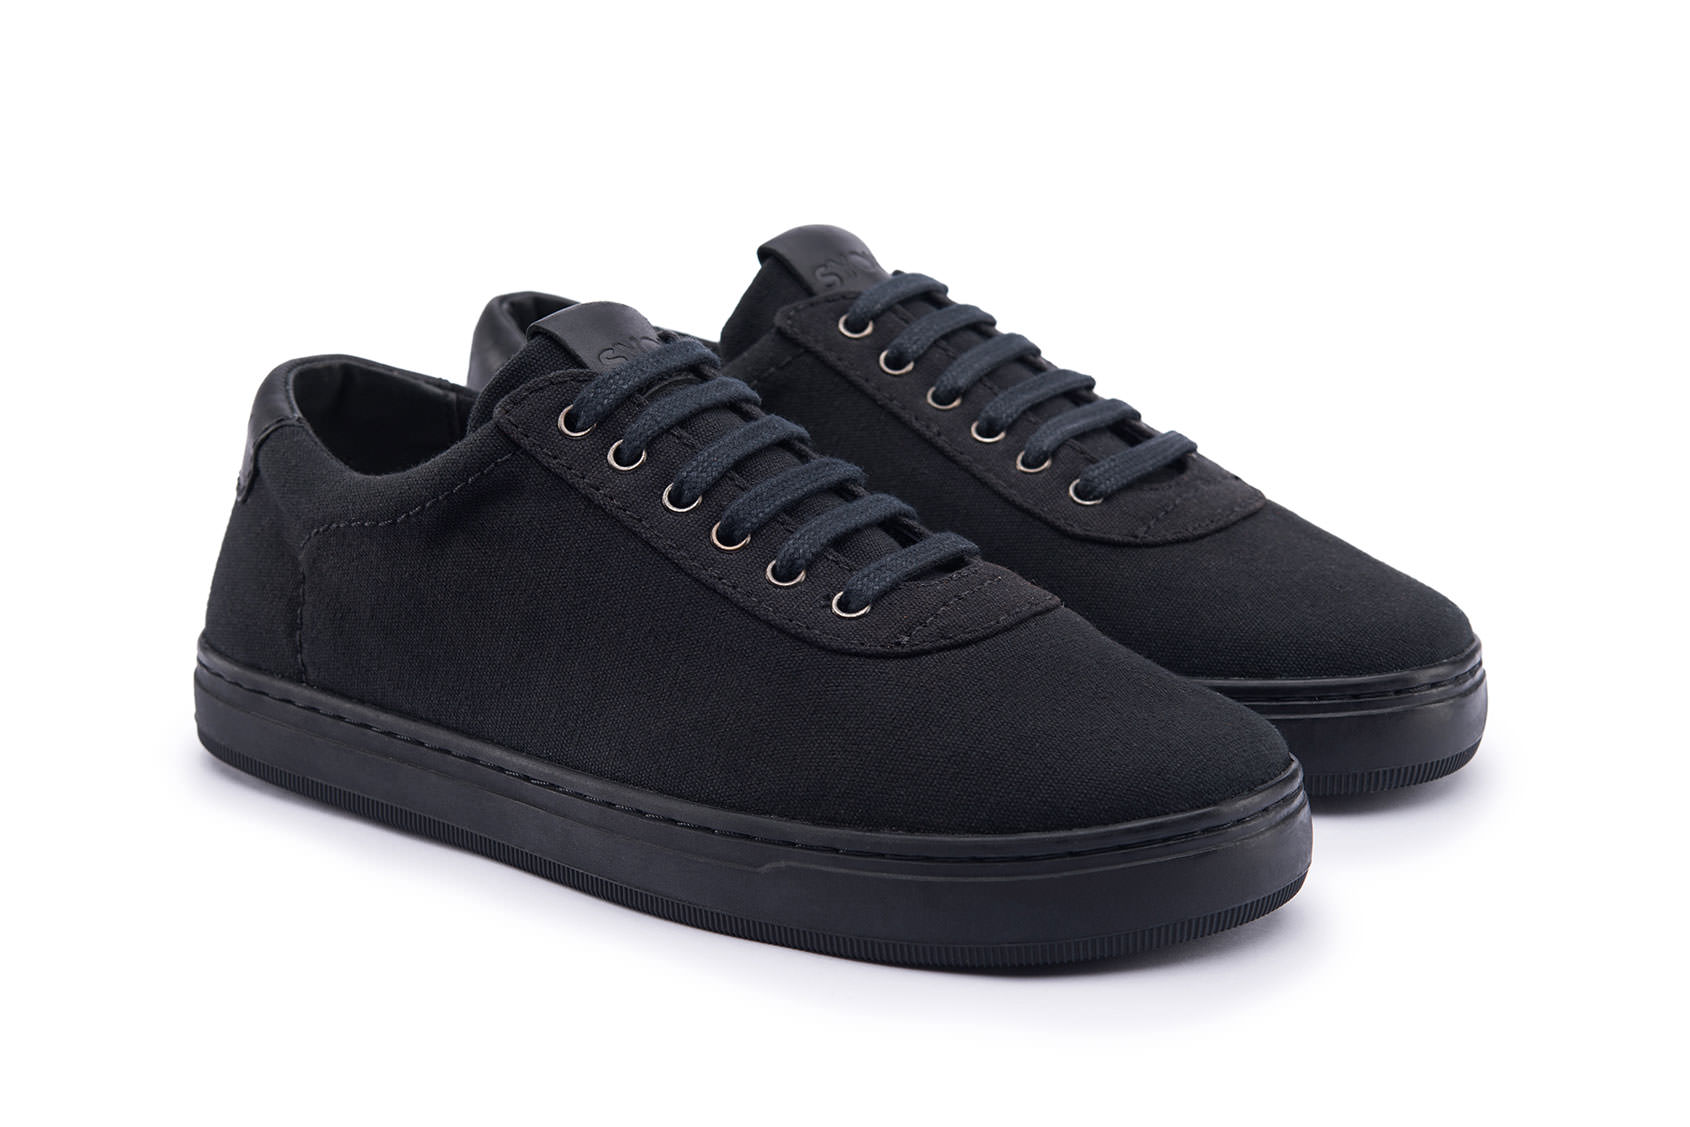 Co 13 all black sneakers syou overview